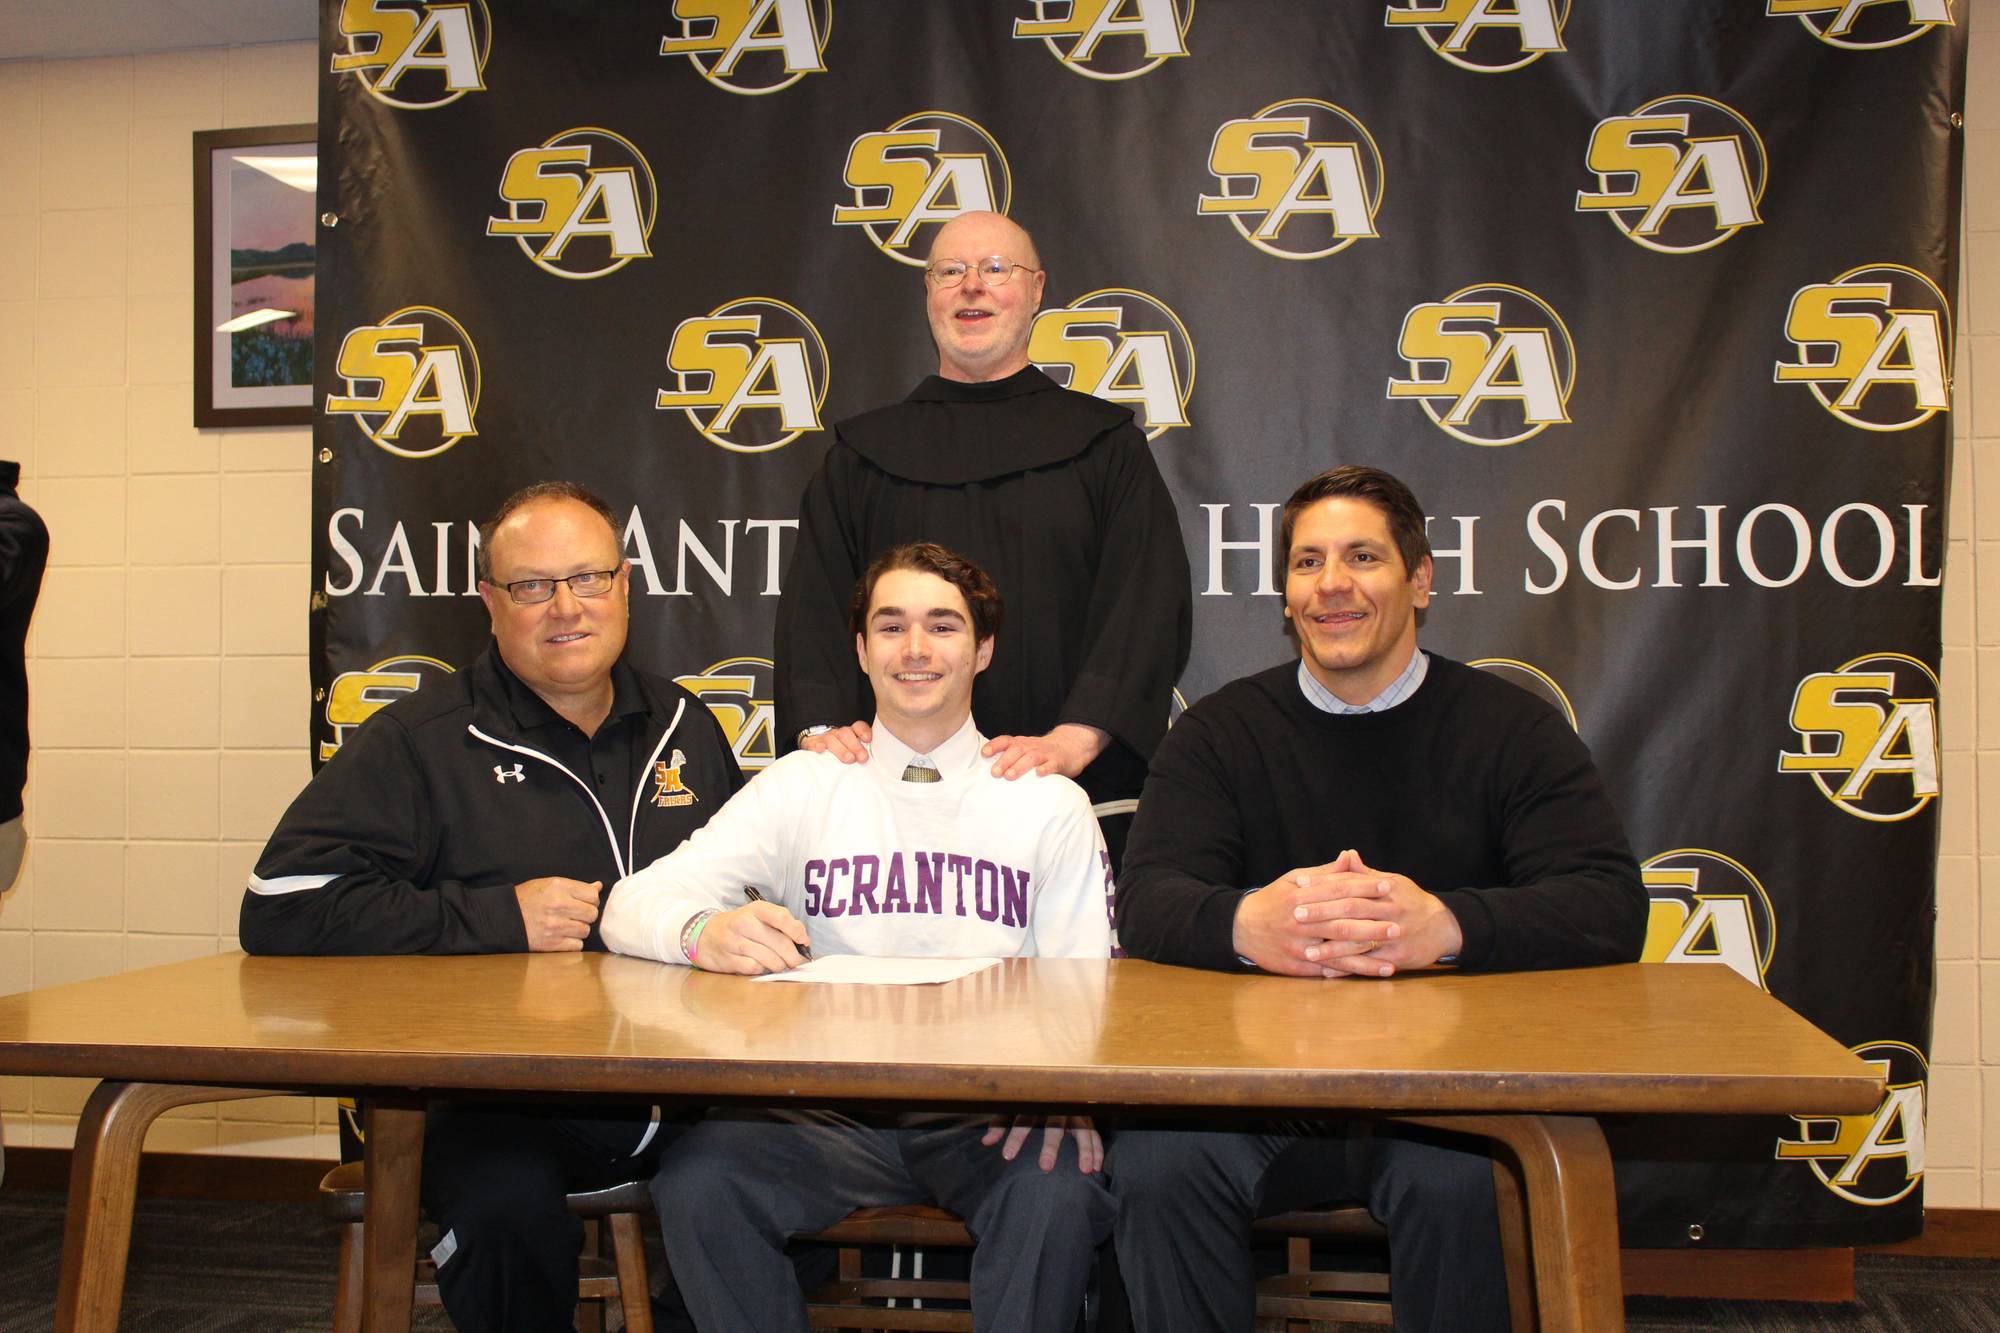 Congratulations to Christian Banaciski on committing to the University of Scranton to play Lacrosse